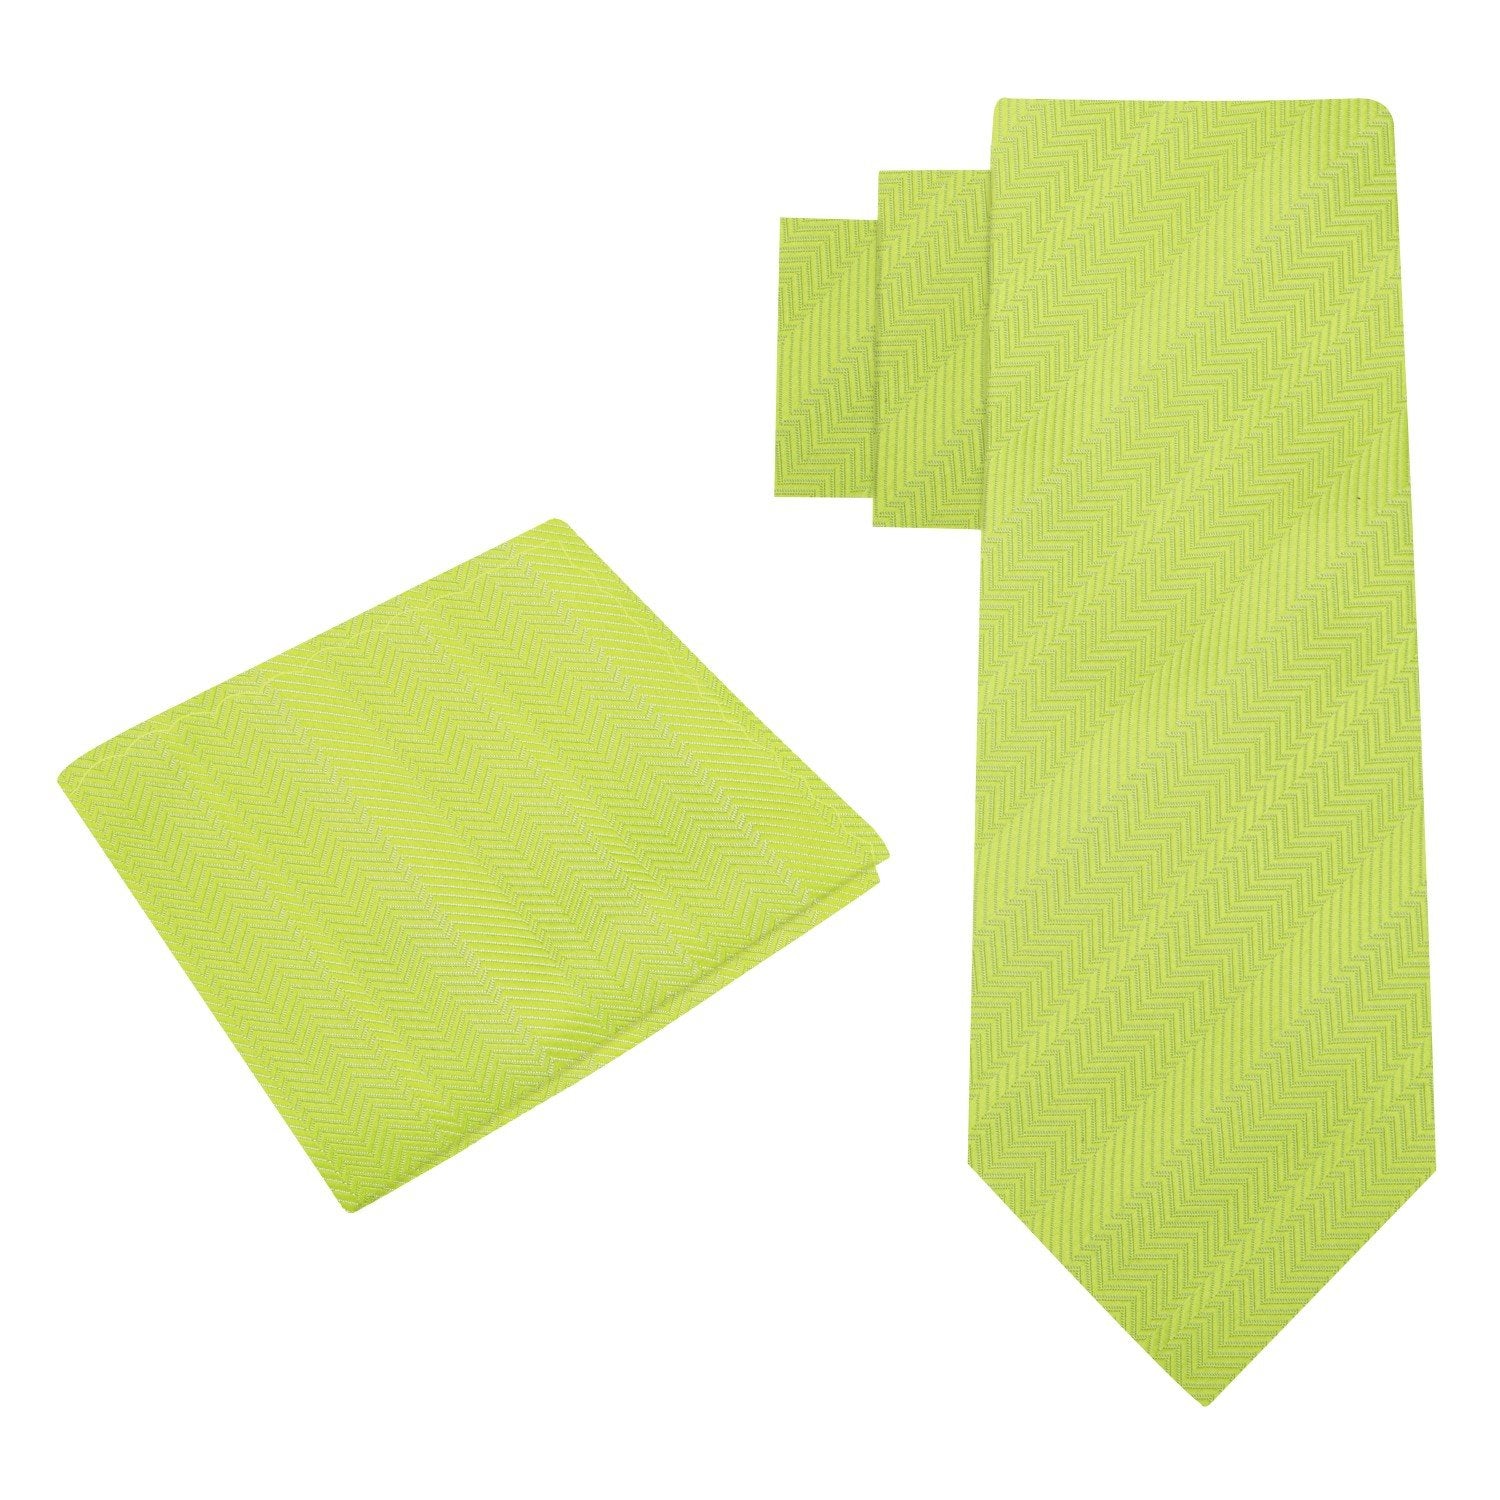 Alt View: Sweet Lime Green Tie and Pocket Square